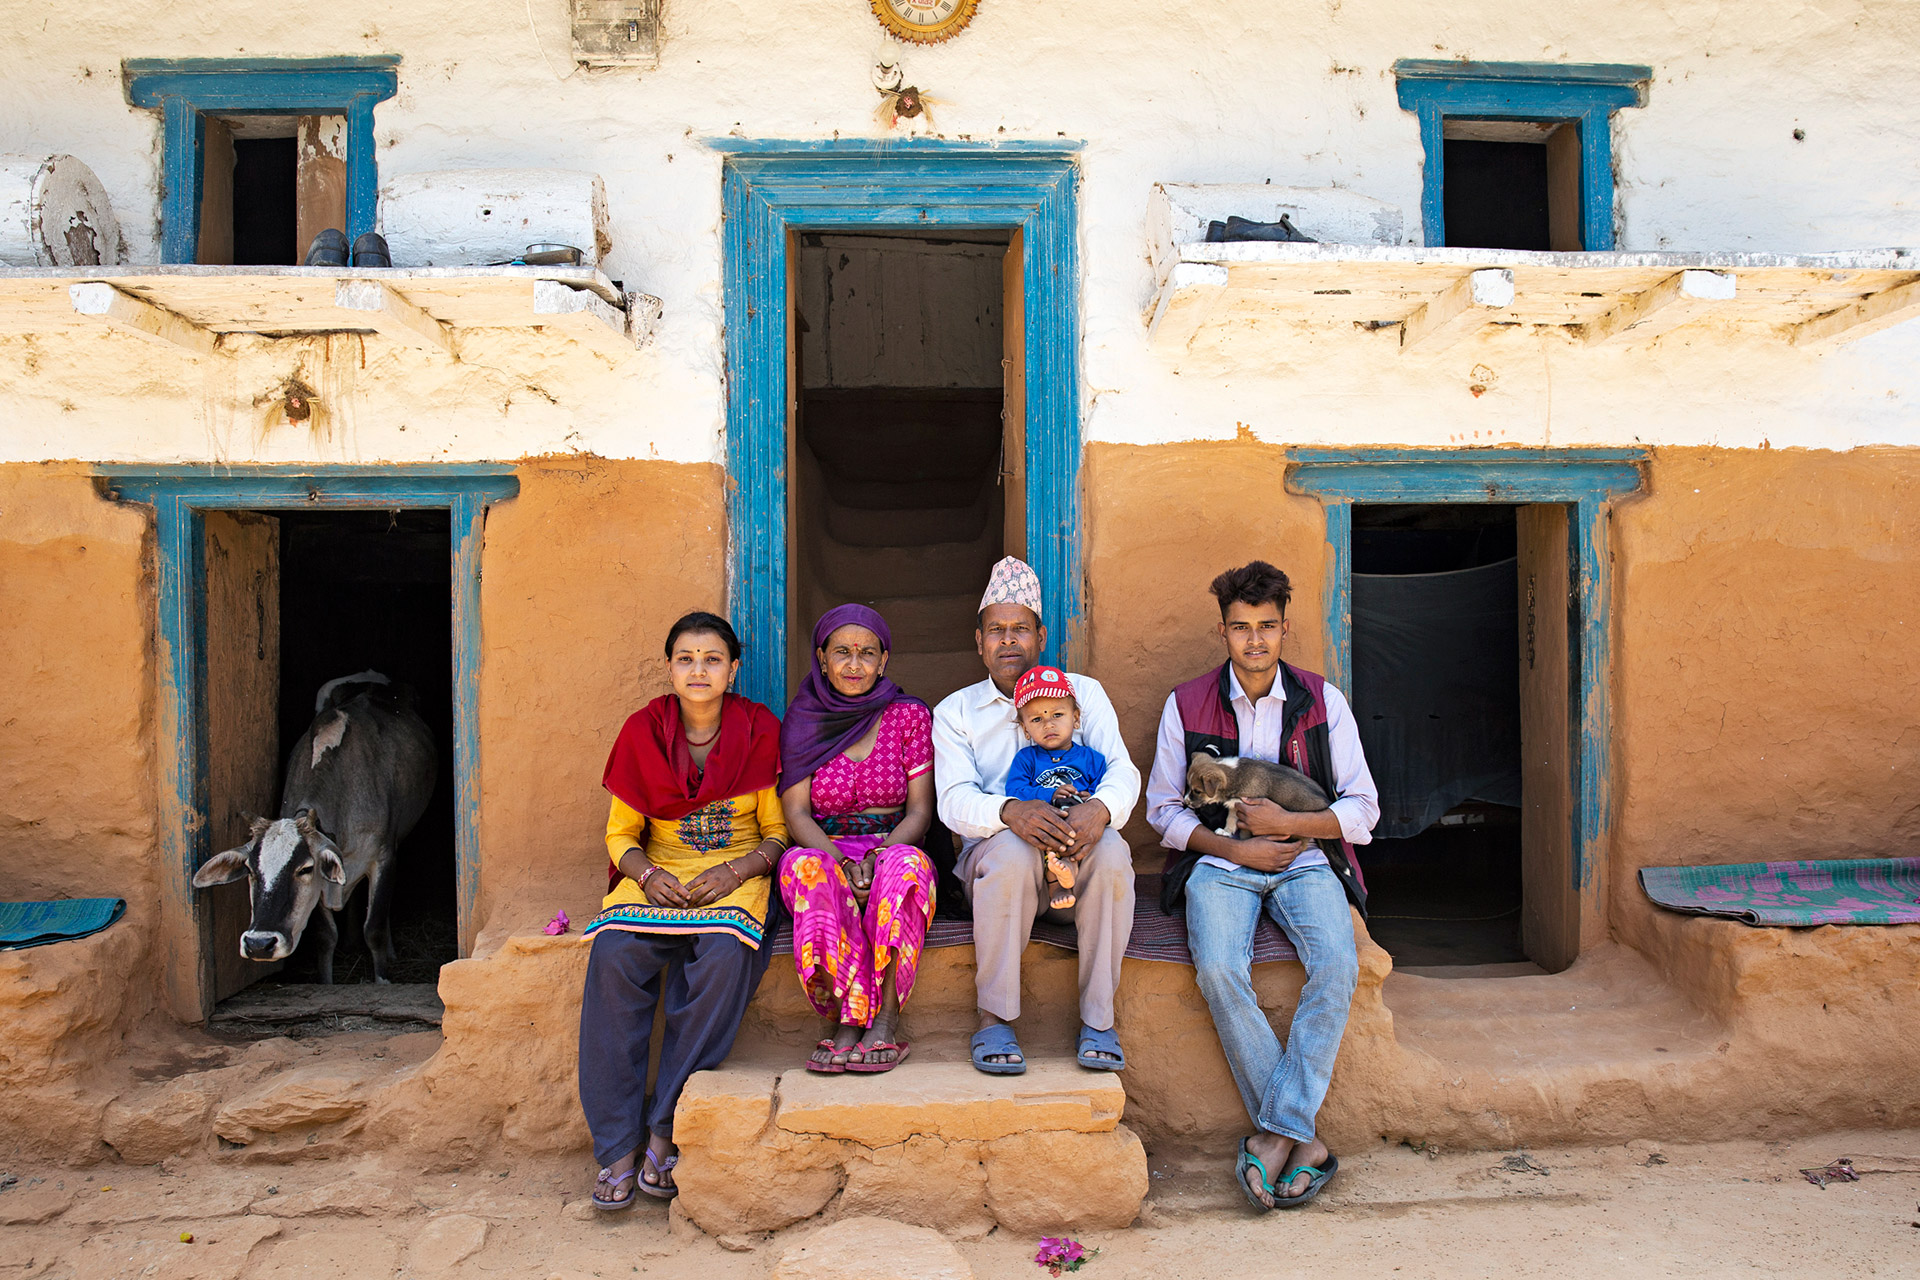 A family is sitting on the porch of their home. A cow is peeking from one of the doorways.